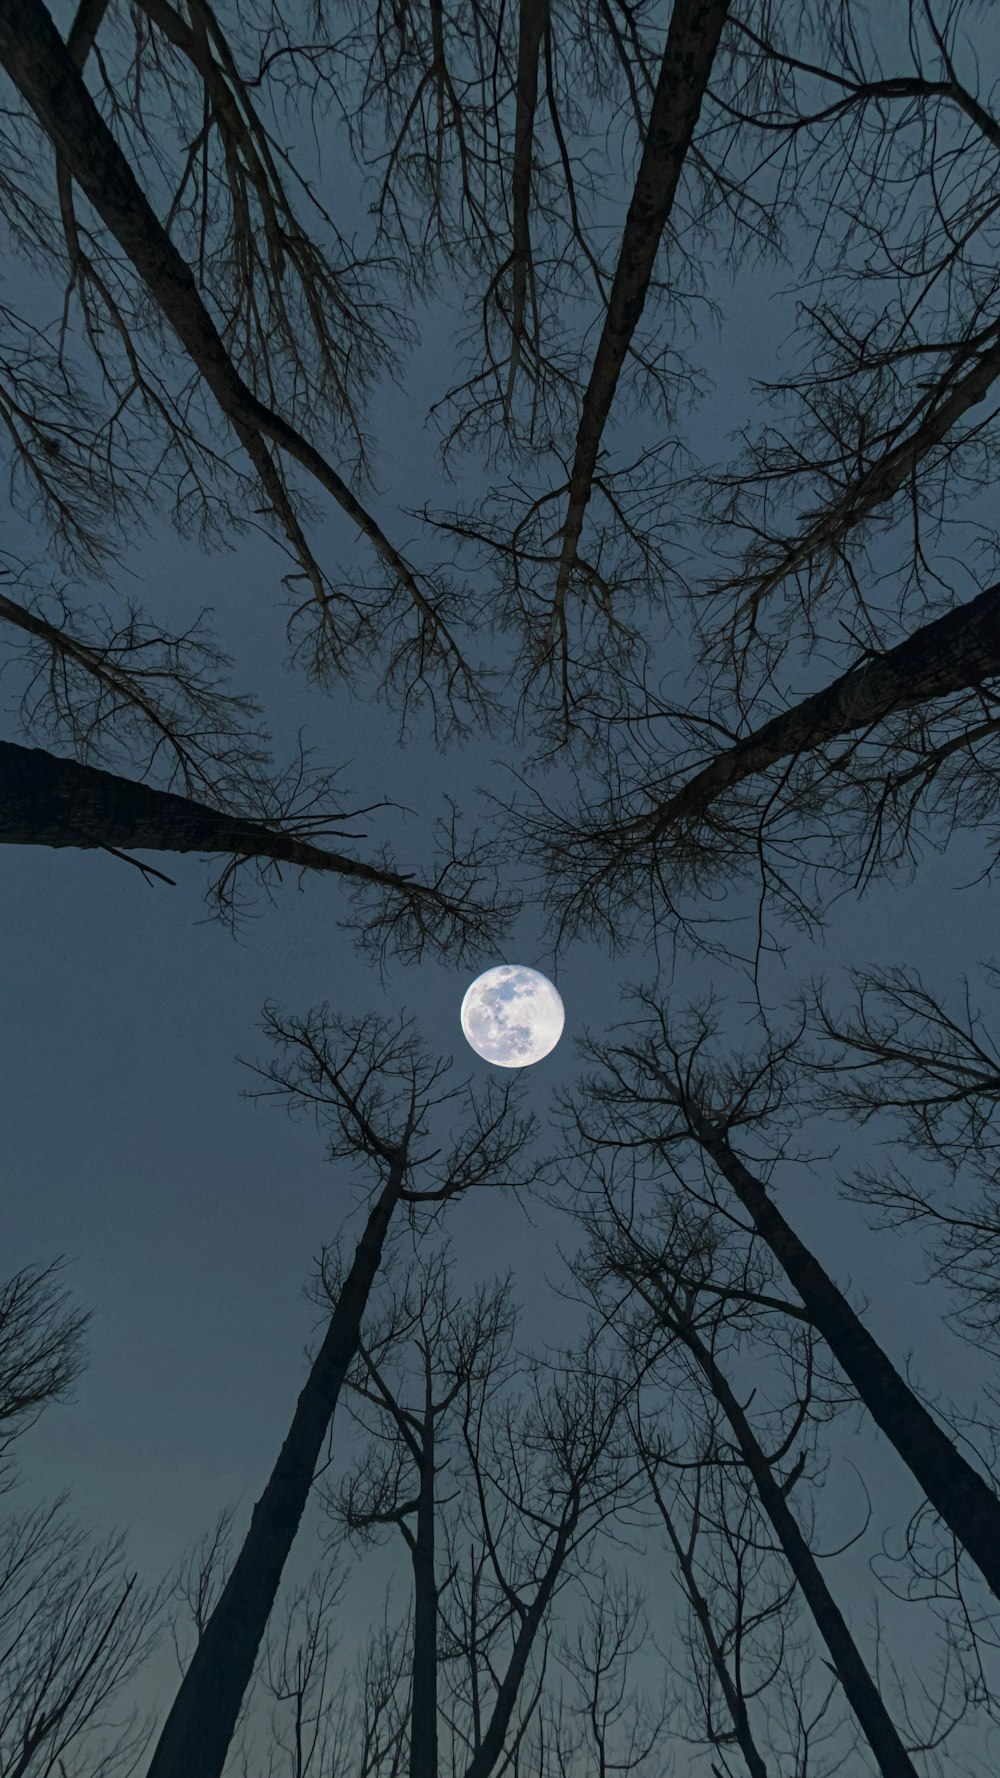 a full moon seen through the branches of trees